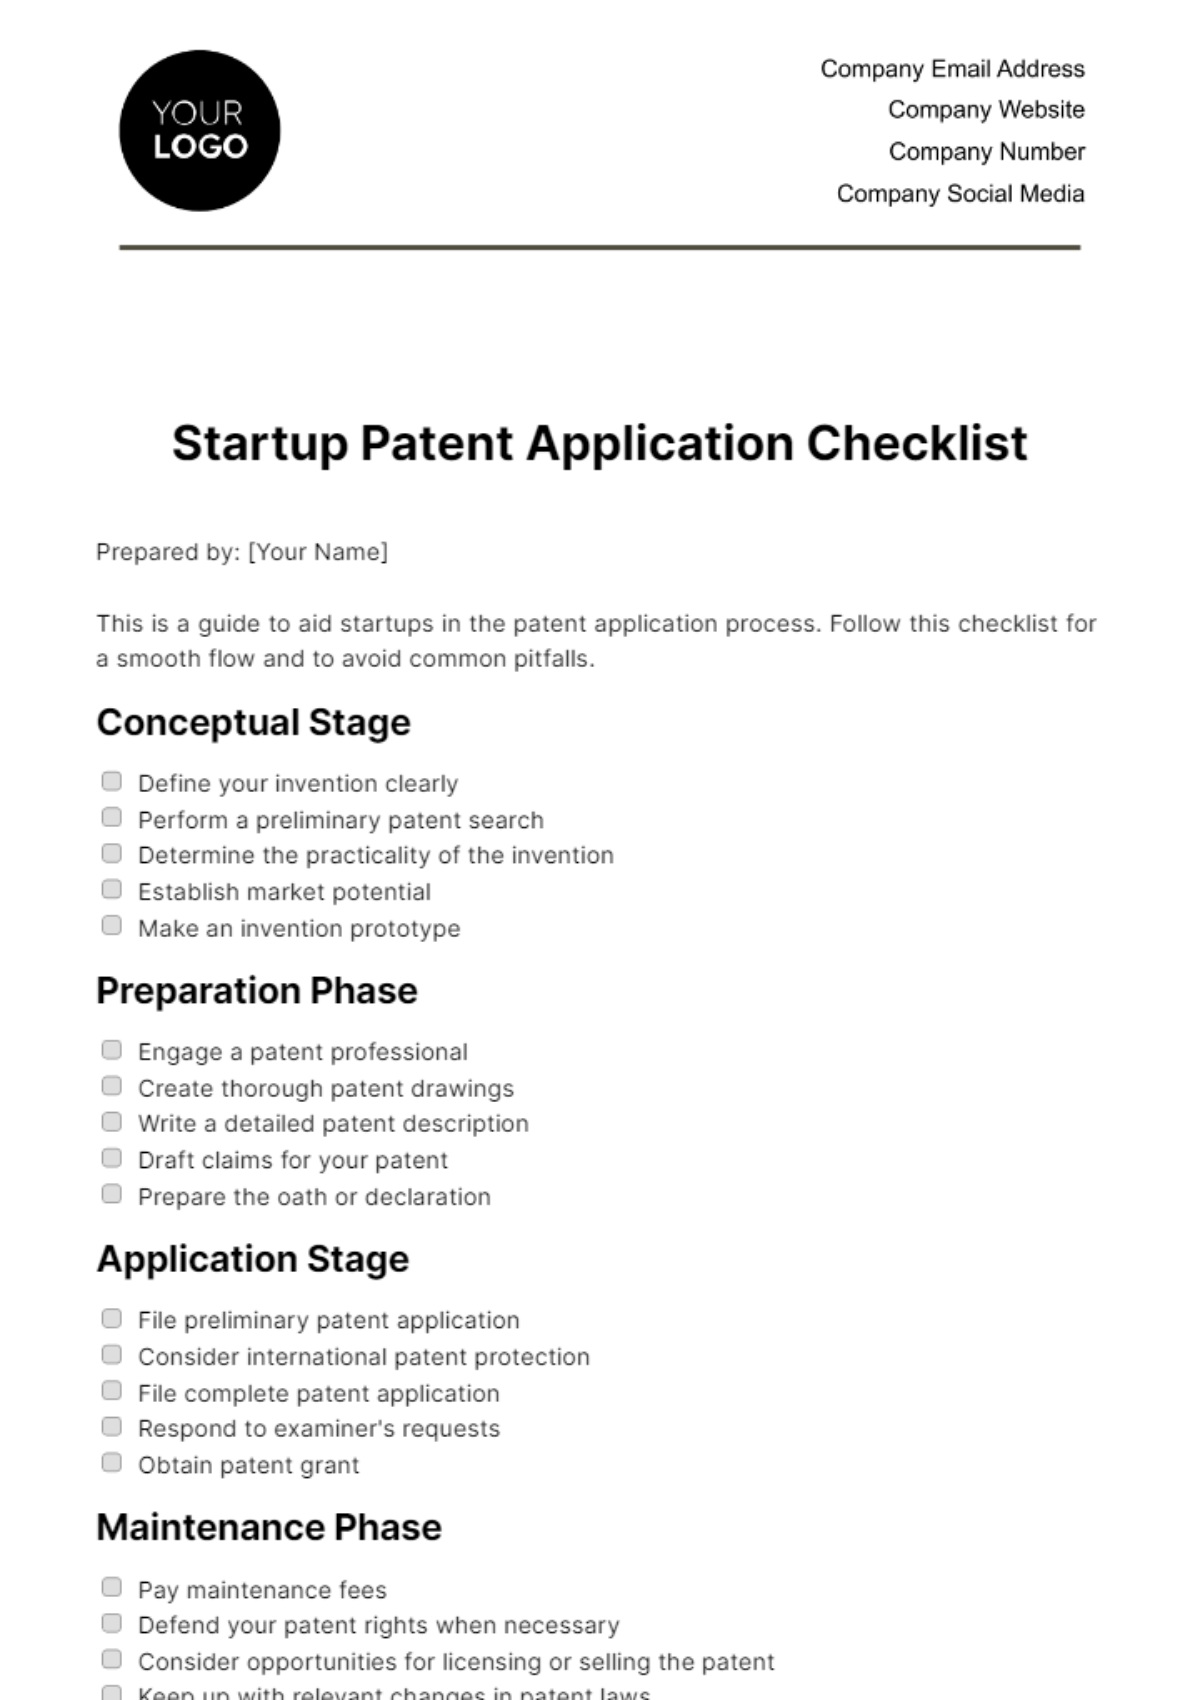 Startup Patent Application Checklist Template